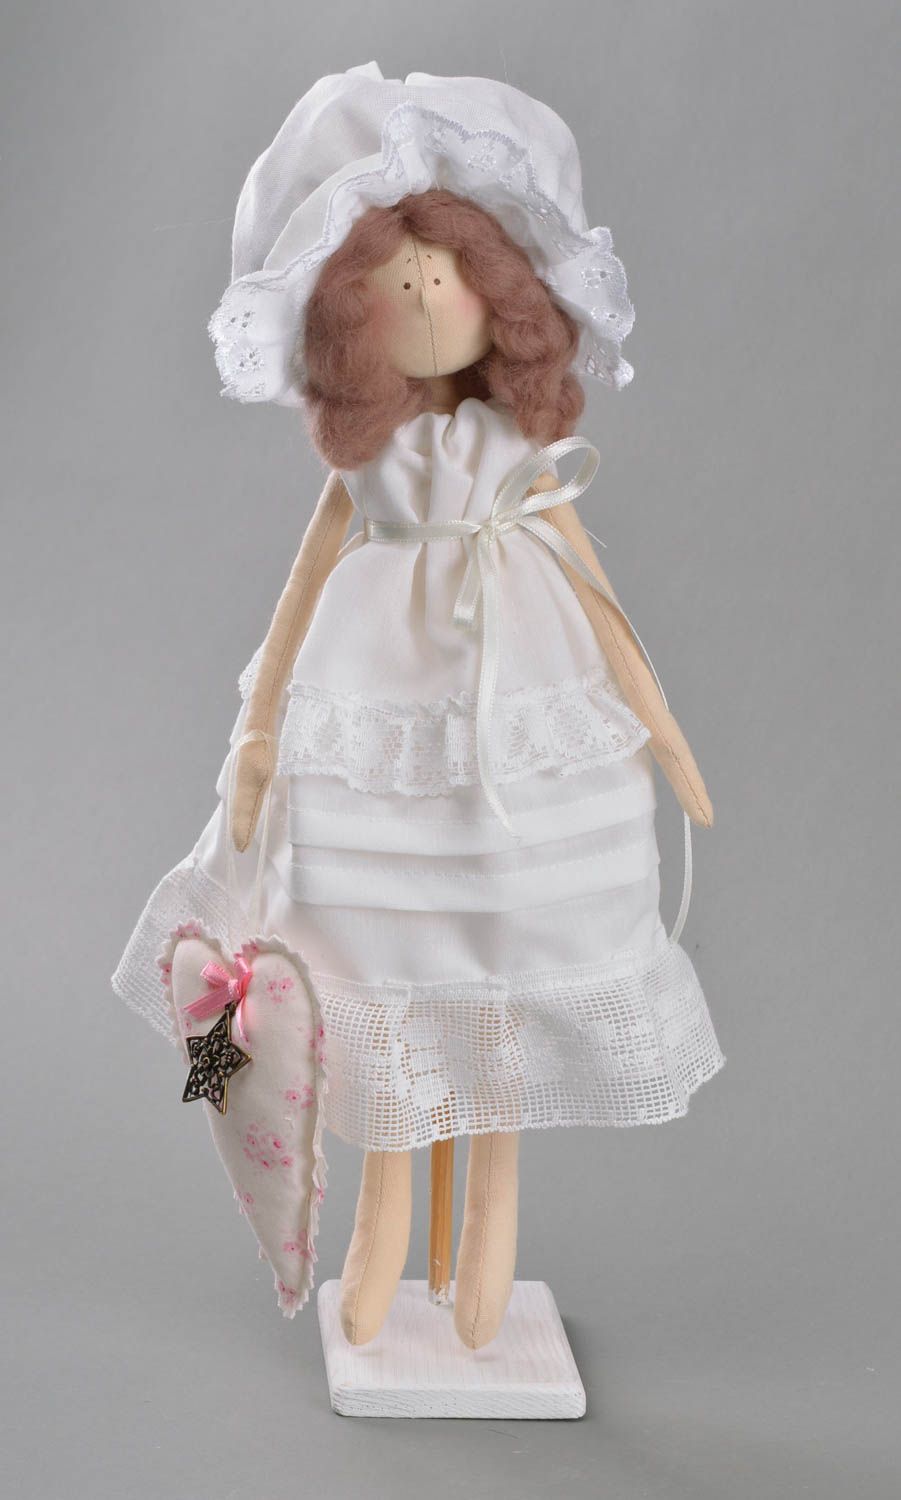 Handmade cute toy doll made of fabric in white dress and bonnet on stand photo 1